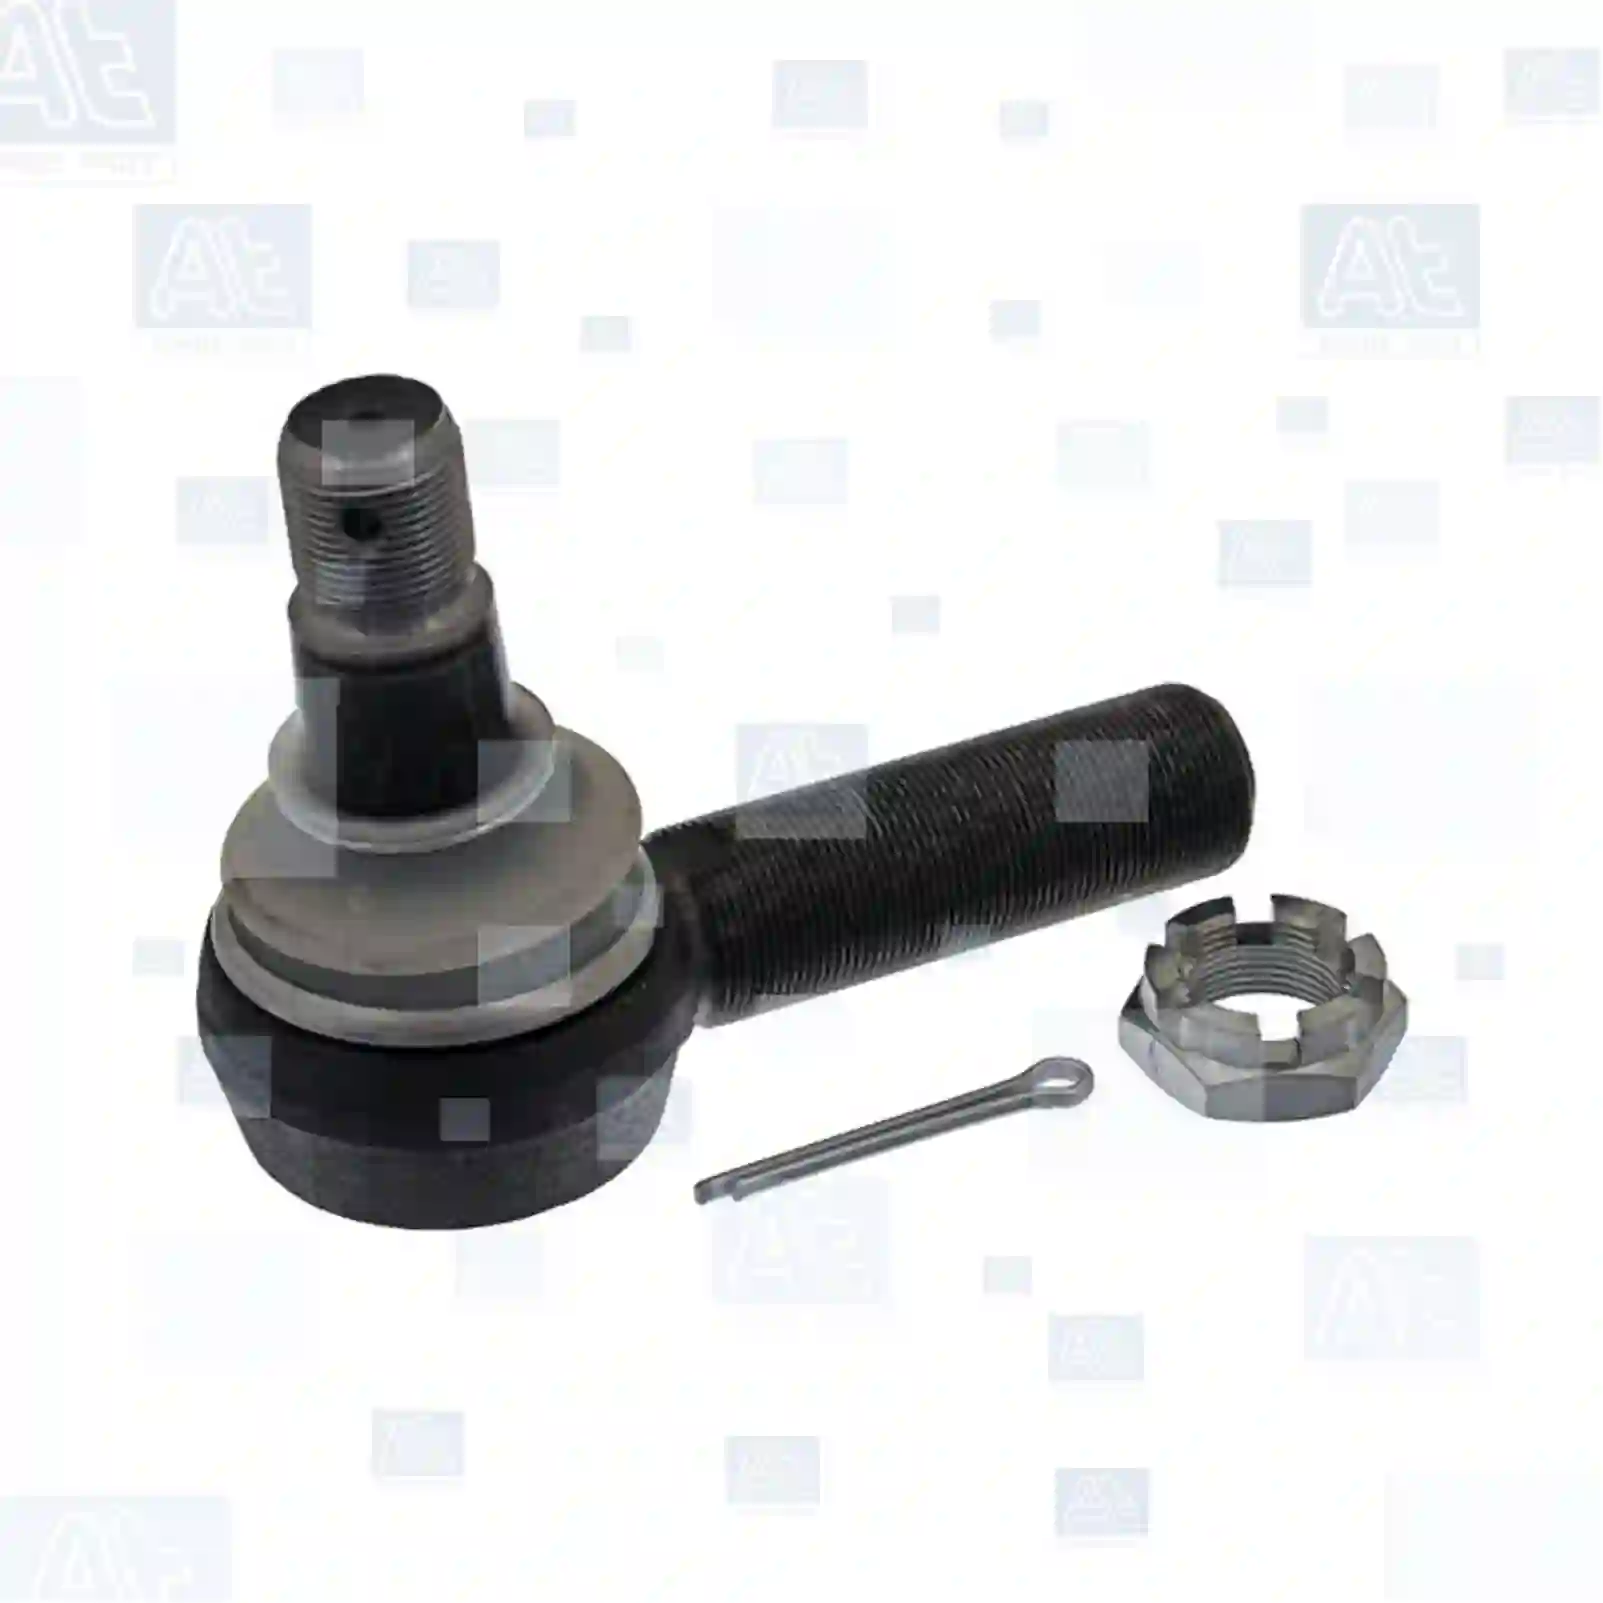 Ball joint, left hand thread, 77705105, 9P914835, 264072, 510052, 3141529R3, 0607053, 0690225, 0696225, 1142021, 1228115, 1329134, 1611088, 607053, 690225, 696205, 696225, 655551, 02966688, 02980323, 02984061, 03096213, 04802444, 04833820, 04833827, 04833830, 07138966, 08122754, 08190225, 42483520, 42485718, 42489395, 42491957, 42493781, 997084080374, 02984061, 04802444, 04833829, 04833830, 42489395, 42489574, 42491957, Y04505101, 56812-7M100, 02984061, 04802444, 04833823, 04833830, 07138966, 08190225, 2984061, 42489395, 42489574, 42491957, 4802444, 4833830, 5001836297, 801211834, 8190225, 571866508, 725009908, 81953010015, 81953010083, 81953010087, 81953010095, 81953010102, 81953016029, 81953016044, 81953016050, 81953016054, 81953016087, 81953016091, 81953016099, 81953016107, 81953016120, 81953016125, 81953016152, 81953016155, 81953016157, 81953016167, 81953016177, 81953016179, 81953016181, 81953016223, 81953016237, 81953016253, 81953016254, 81953016275, 81953016279, 81953016285, 81953016309, 81953016311, 81953016348, 81953016351, 81953016378, 84953016004, 90804102273, 90804102730, N1011020299, 0003300135, 0004600648, 0004601248, 0004603448, 0004603548, 0014600348, 0014601448, 0014602348, 0014603648, 0014603748, 0014607848, 0014608748, 0016077848, 0024600348, 3503307335, 3503307535, 6851476000, 6984603748, 8226236058, 011015685, 011019661, 120325101, 120325200, 122353201, 579343, 0003401170, 5000242478, 5000242486, 5000288361, 5000288378, 5000587534, 5000823265, 5000858774, 5001832581, 5001836297, 5001858759, 5001858774, 5010832583, 5430027884, 7420894053, 8001858759, 1358792, 1420821, 1738380, 1914426, 2021425, 2051165, 283783, 395009, 6851481000, 6851485000, 8226236058, 0801211834, 218633100115, 634301300, 20264072, 15176472, 1696057, 1697297, 20742129, 20745042, 20821150, 20894053, ZG40346-0008 ||  77705105 At Spare Part | Engine, Accelerator Pedal, Camshaft, Connecting Rod, Crankcase, Crankshaft, Cylinder Head, Engine Suspension Mountings, Exhaust Manifold, Exhaust Gas Recirculation, Filter Kits, Flywheel Housing, General Overhaul Kits, Engine, Intake Manifold, Oil Cleaner, Oil Cooler, Oil Filter, Oil Pump, Oil Sump, Piston & Liner, Sensor & Switch, Timing Case, Turbocharger, Cooling System, Belt Tensioner, Coolant Filter, Coolant Pipe, Corrosion Prevention Agent, Drive, Expansion Tank, Fan, Intercooler, Monitors & Gauges, Radiator, Thermostat, V-Belt / Timing belt, Water Pump, Fuel System, Electronical Injector Unit, Feed Pump, Fuel Filter, cpl., Fuel Gauge Sender,  Fuel Line, Fuel Pump, Fuel Tank, Injection Line Kit, Injection Pump, Exhaust System, Clutch & Pedal, Gearbox, Propeller Shaft, Axles, Brake System, Hubs & Wheels, Suspension, Leaf Spring, Universal Parts / Accessories, Steering, Electrical System, Cabin Ball joint, left hand thread, 77705105, 9P914835, 264072, 510052, 3141529R3, 0607053, 0690225, 0696225, 1142021, 1228115, 1329134, 1611088, 607053, 690225, 696205, 696225, 655551, 02966688, 02980323, 02984061, 03096213, 04802444, 04833820, 04833827, 04833830, 07138966, 08122754, 08190225, 42483520, 42485718, 42489395, 42491957, 42493781, 997084080374, 02984061, 04802444, 04833829, 04833830, 42489395, 42489574, 42491957, Y04505101, 56812-7M100, 02984061, 04802444, 04833823, 04833830, 07138966, 08190225, 2984061, 42489395, 42489574, 42491957, 4802444, 4833830, 5001836297, 801211834, 8190225, 571866508, 725009908, 81953010015, 81953010083, 81953010087, 81953010095, 81953010102, 81953016029, 81953016044, 81953016050, 81953016054, 81953016087, 81953016091, 81953016099, 81953016107, 81953016120, 81953016125, 81953016152, 81953016155, 81953016157, 81953016167, 81953016177, 81953016179, 81953016181, 81953016223, 81953016237, 81953016253, 81953016254, 81953016275, 81953016279, 81953016285, 81953016309, 81953016311, 81953016348, 81953016351, 81953016378, 84953016004, 90804102273, 90804102730, N1011020299, 0003300135, 0004600648, 0004601248, 0004603448, 0004603548, 0014600348, 0014601448, 0014602348, 0014603648, 0014603748, 0014607848, 0014608748, 0016077848, 0024600348, 3503307335, 3503307535, 6851476000, 6984603748, 8226236058, 011015685, 011019661, 120325101, 120325200, 122353201, 579343, 0003401170, 5000242478, 5000242486, 5000288361, 5000288378, 5000587534, 5000823265, 5000858774, 5001832581, 5001836297, 5001858759, 5001858774, 5010832583, 5430027884, 7420894053, 8001858759, 1358792, 1420821, 1738380, 1914426, 2021425, 2051165, 283783, 395009, 6851481000, 6851485000, 8226236058, 0801211834, 218633100115, 634301300, 20264072, 15176472, 1696057, 1697297, 20742129, 20745042, 20821150, 20894053, ZG40346-0008 ||  77705105 At Spare Part | Engine, Accelerator Pedal, Camshaft, Connecting Rod, Crankcase, Crankshaft, Cylinder Head, Engine Suspension Mountings, Exhaust Manifold, Exhaust Gas Recirculation, Filter Kits, Flywheel Housing, General Overhaul Kits, Engine, Intake Manifold, Oil Cleaner, Oil Cooler, Oil Filter, Oil Pump, Oil Sump, Piston & Liner, Sensor & Switch, Timing Case, Turbocharger, Cooling System, Belt Tensioner, Coolant Filter, Coolant Pipe, Corrosion Prevention Agent, Drive, Expansion Tank, Fan, Intercooler, Monitors & Gauges, Radiator, Thermostat, V-Belt / Timing belt, Water Pump, Fuel System, Electronical Injector Unit, Feed Pump, Fuel Filter, cpl., Fuel Gauge Sender,  Fuel Line, Fuel Pump, Fuel Tank, Injection Line Kit, Injection Pump, Exhaust System, Clutch & Pedal, Gearbox, Propeller Shaft, Axles, Brake System, Hubs & Wheels, Suspension, Leaf Spring, Universal Parts / Accessories, Steering, Electrical System, Cabin